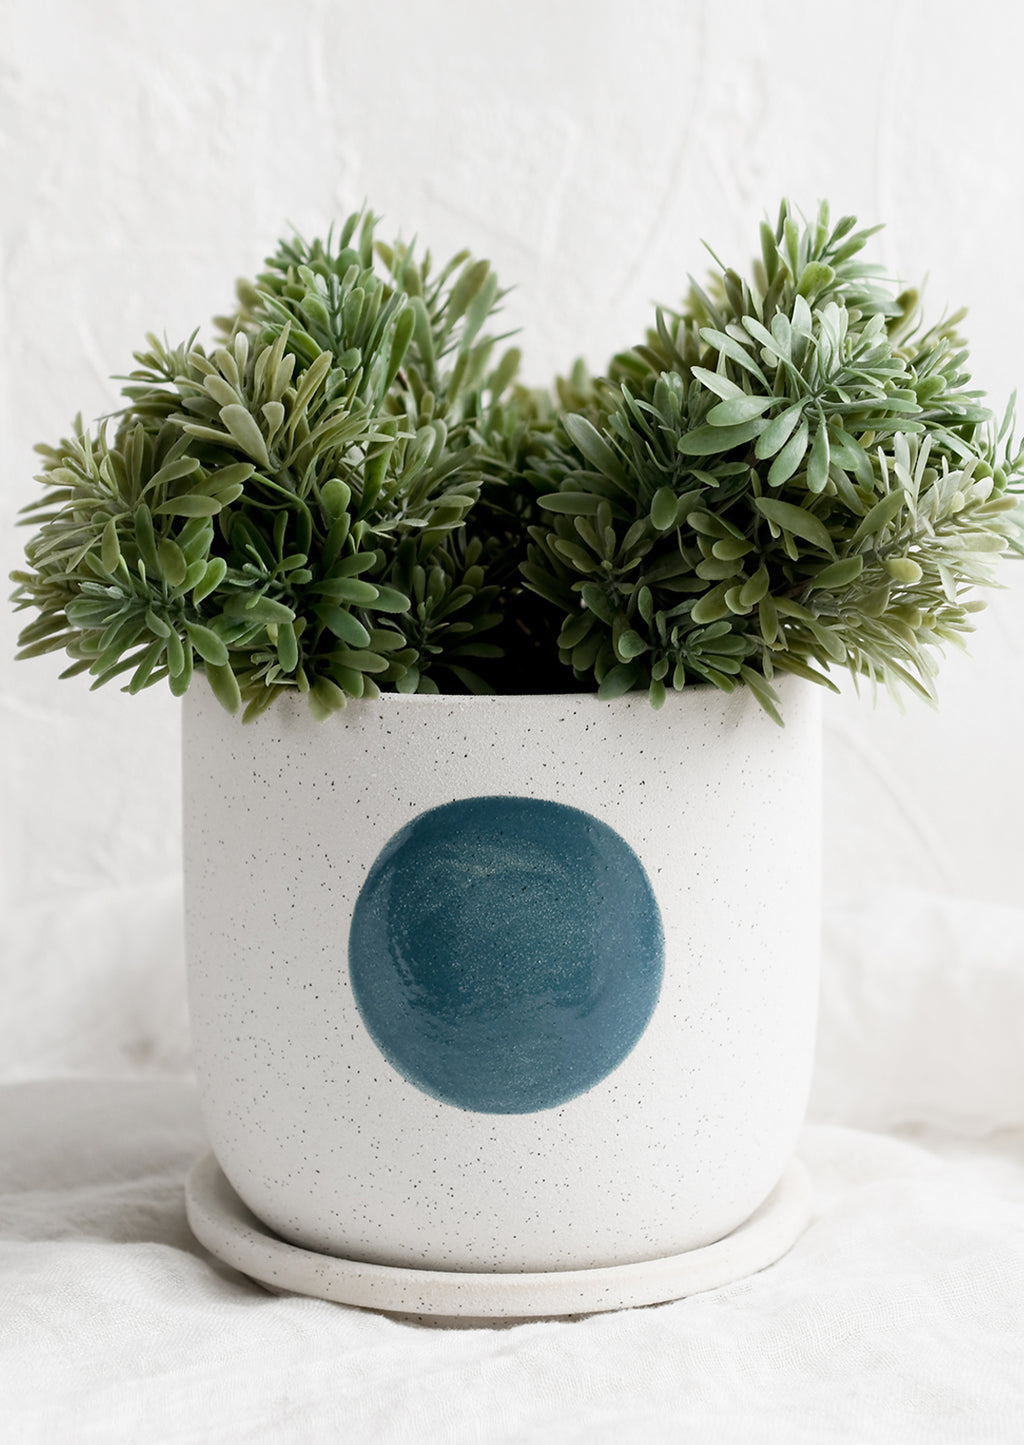 2: A white ceramic planter with blue dot, holding plant.